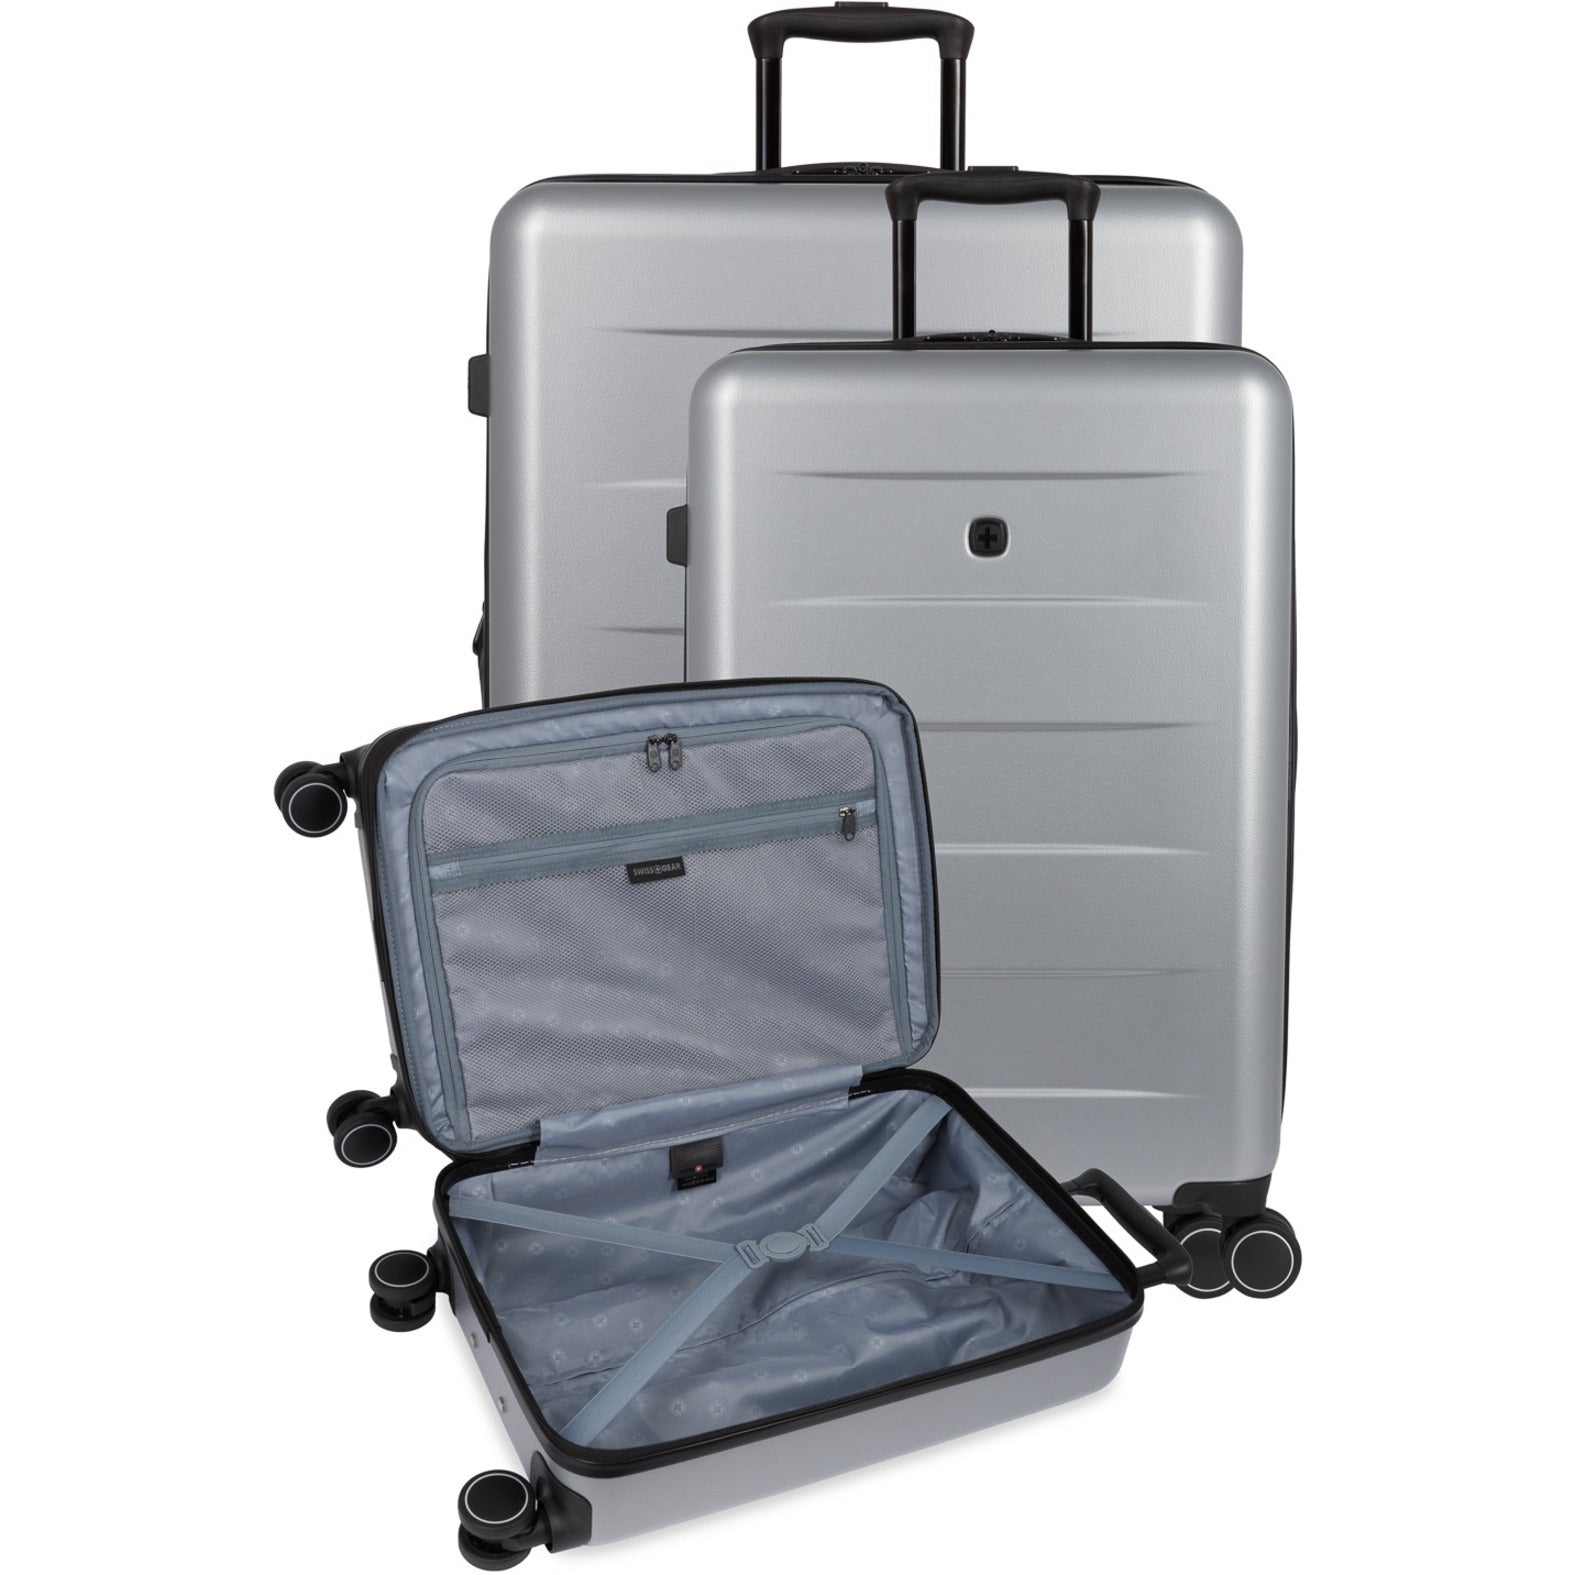 SwissGear 80203414 8020 Expandable Hardside Spinner 3pc Luggage Set, Ultimate Gray - Rugged Travel Essential